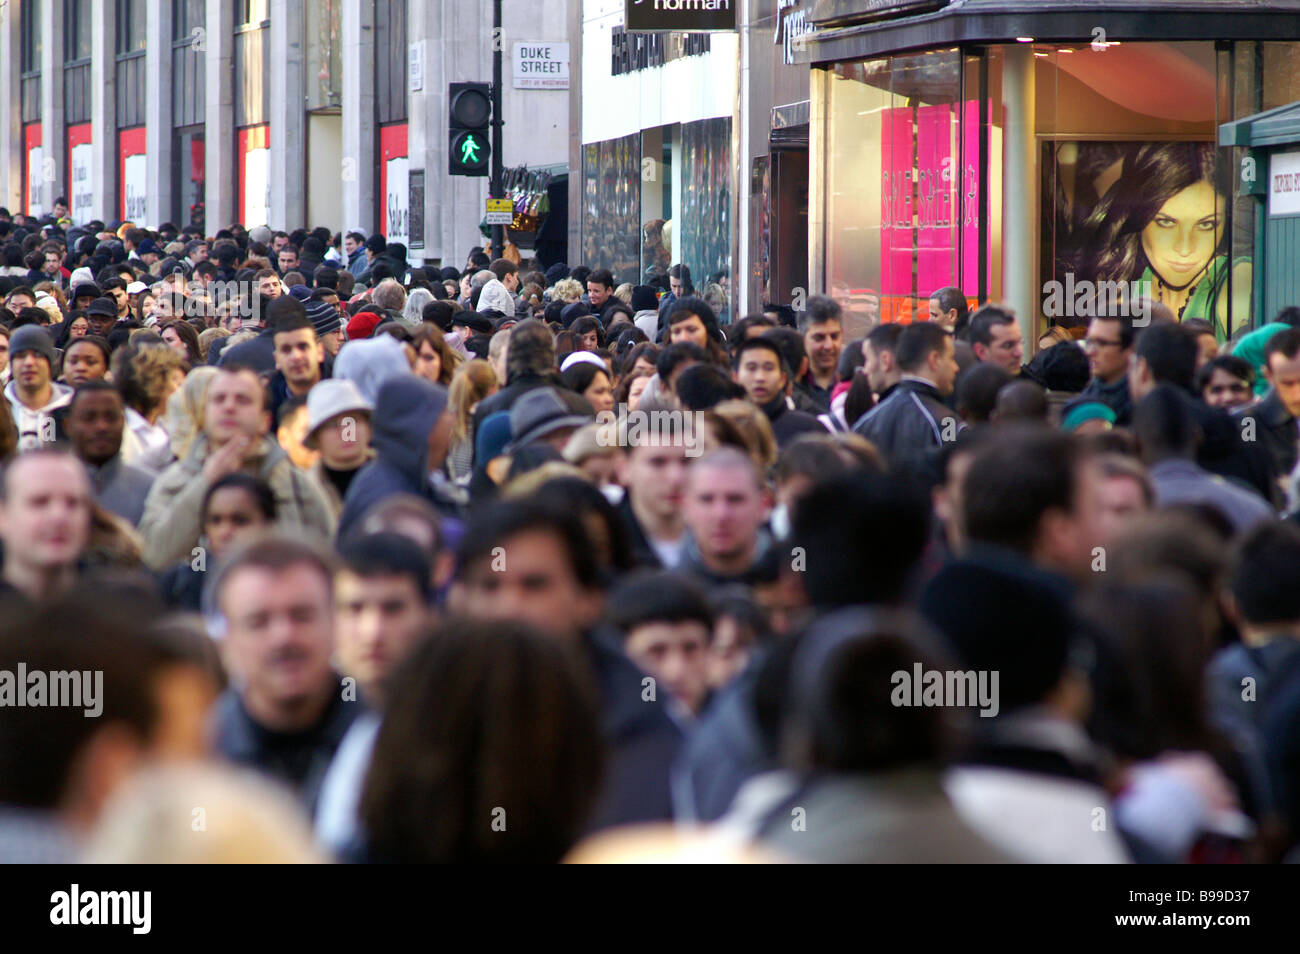 Incredible crowd at Oxford Street at Boxing Day. London Stock Photo